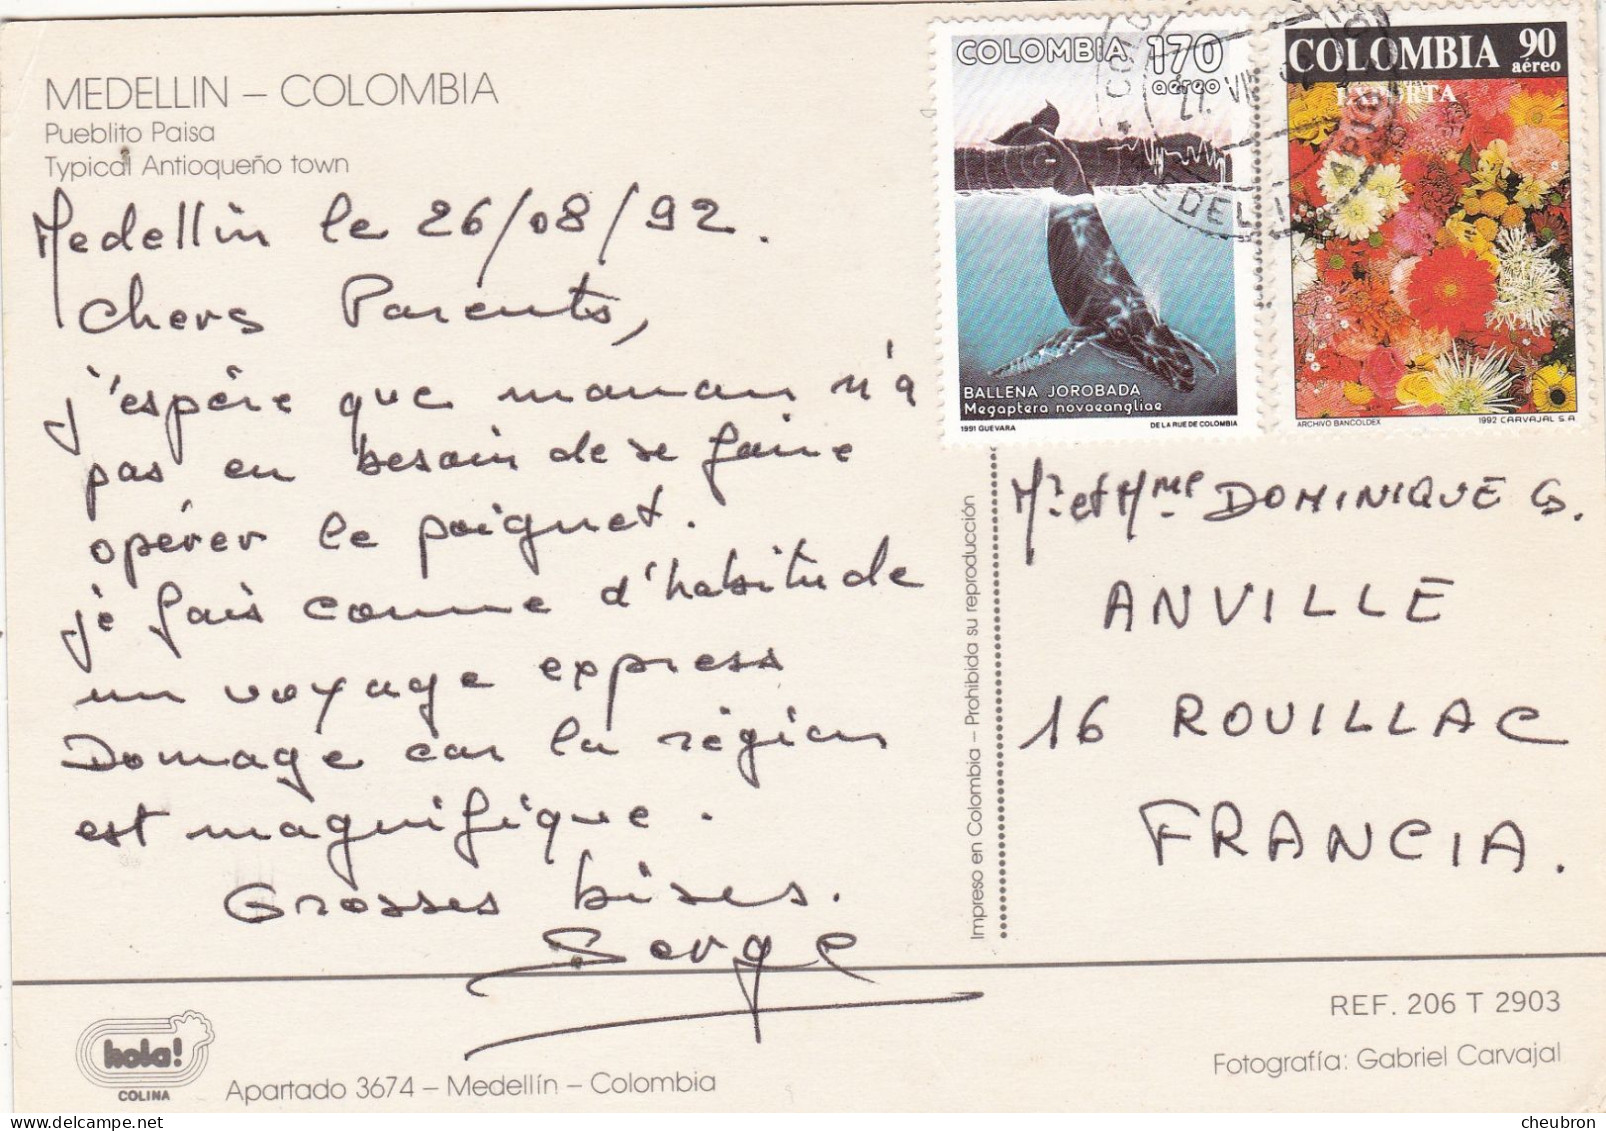 COLOMBIE. MEDELLIN (ENVOYE DE).." TYPICAL ANTIOQUENO TOWN " .ANNEE 1992 + TEXTE + TIMBRES - Colombia